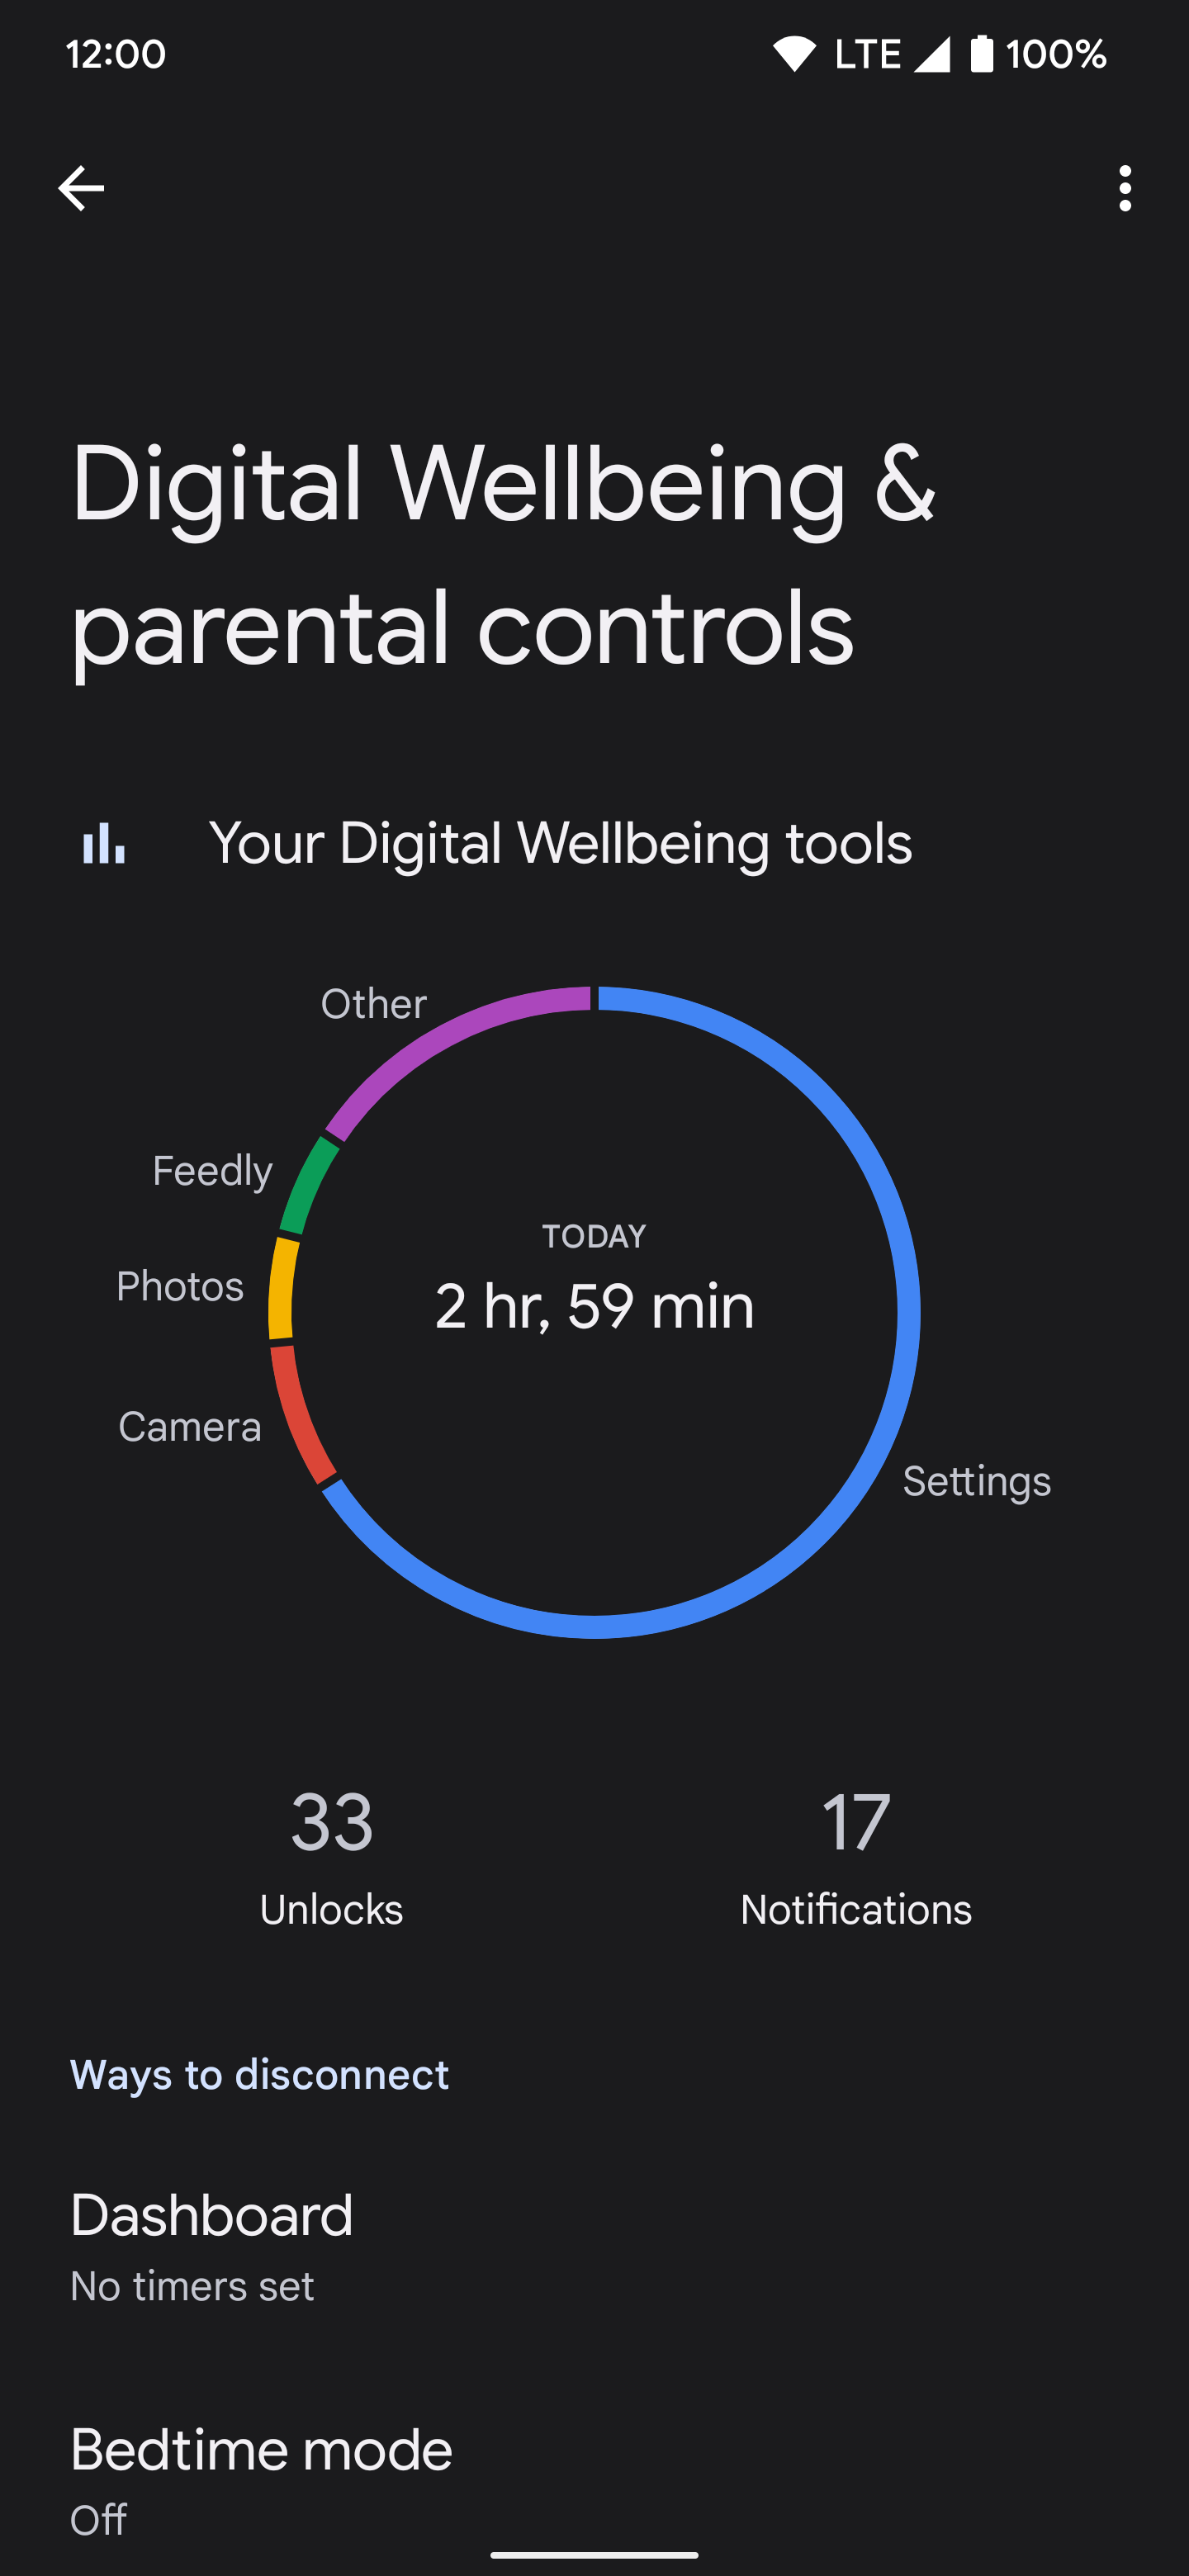 Screenshot shows the Digital Wellbeing & parental controls homepage displayed with usage access on, now displaying app usage data.